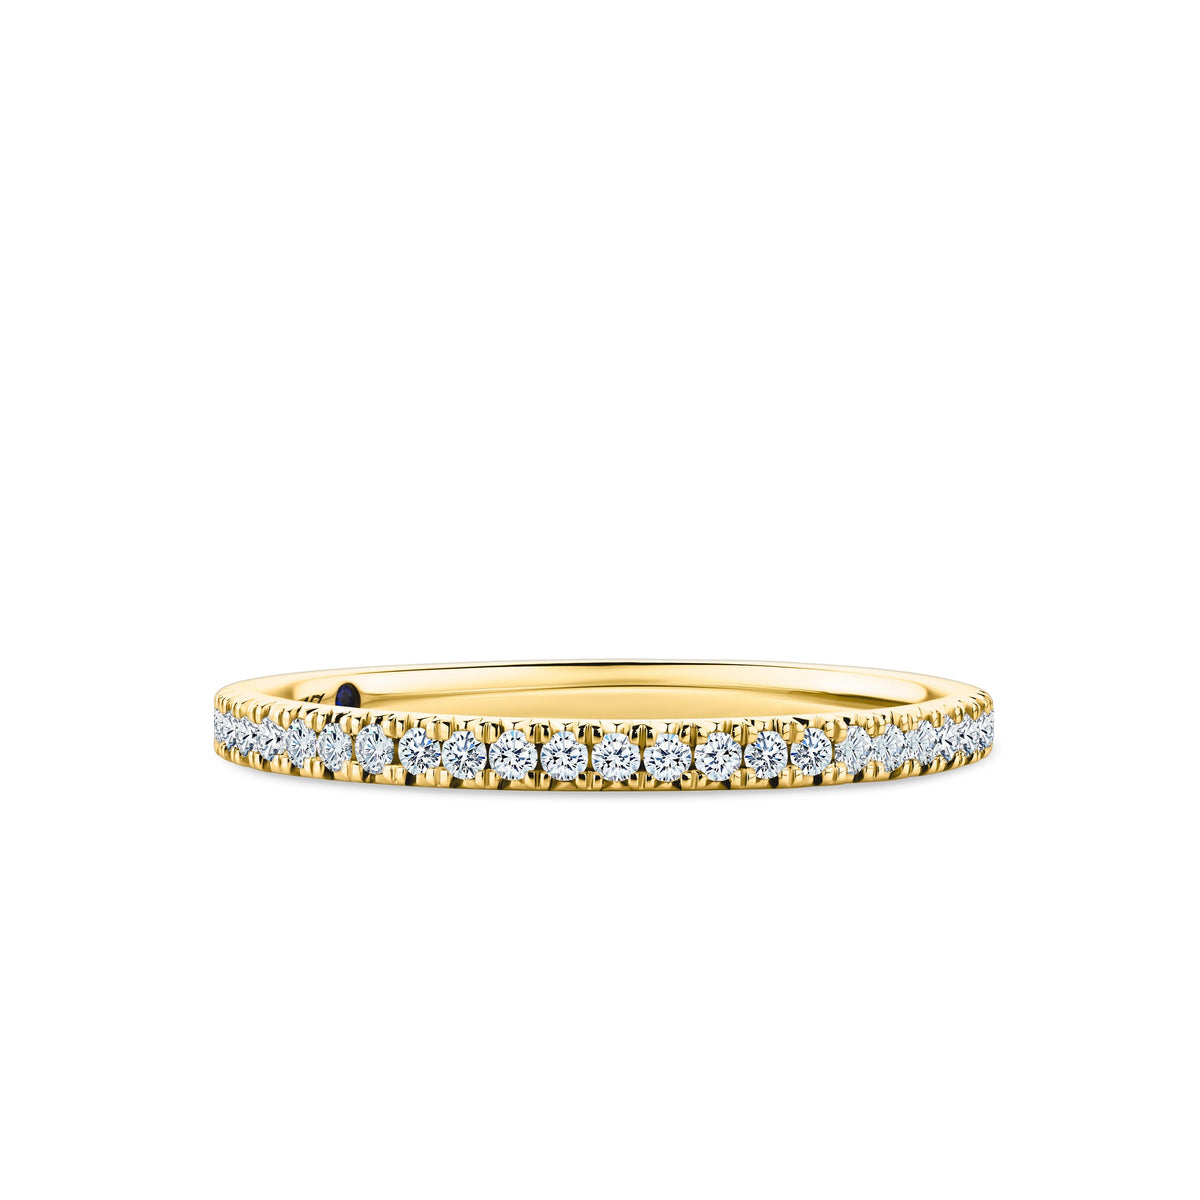 1917™ 0.21ct TW Diamond Pave Wedding Band in 18ct Yellow Gold - Wallace Bishop